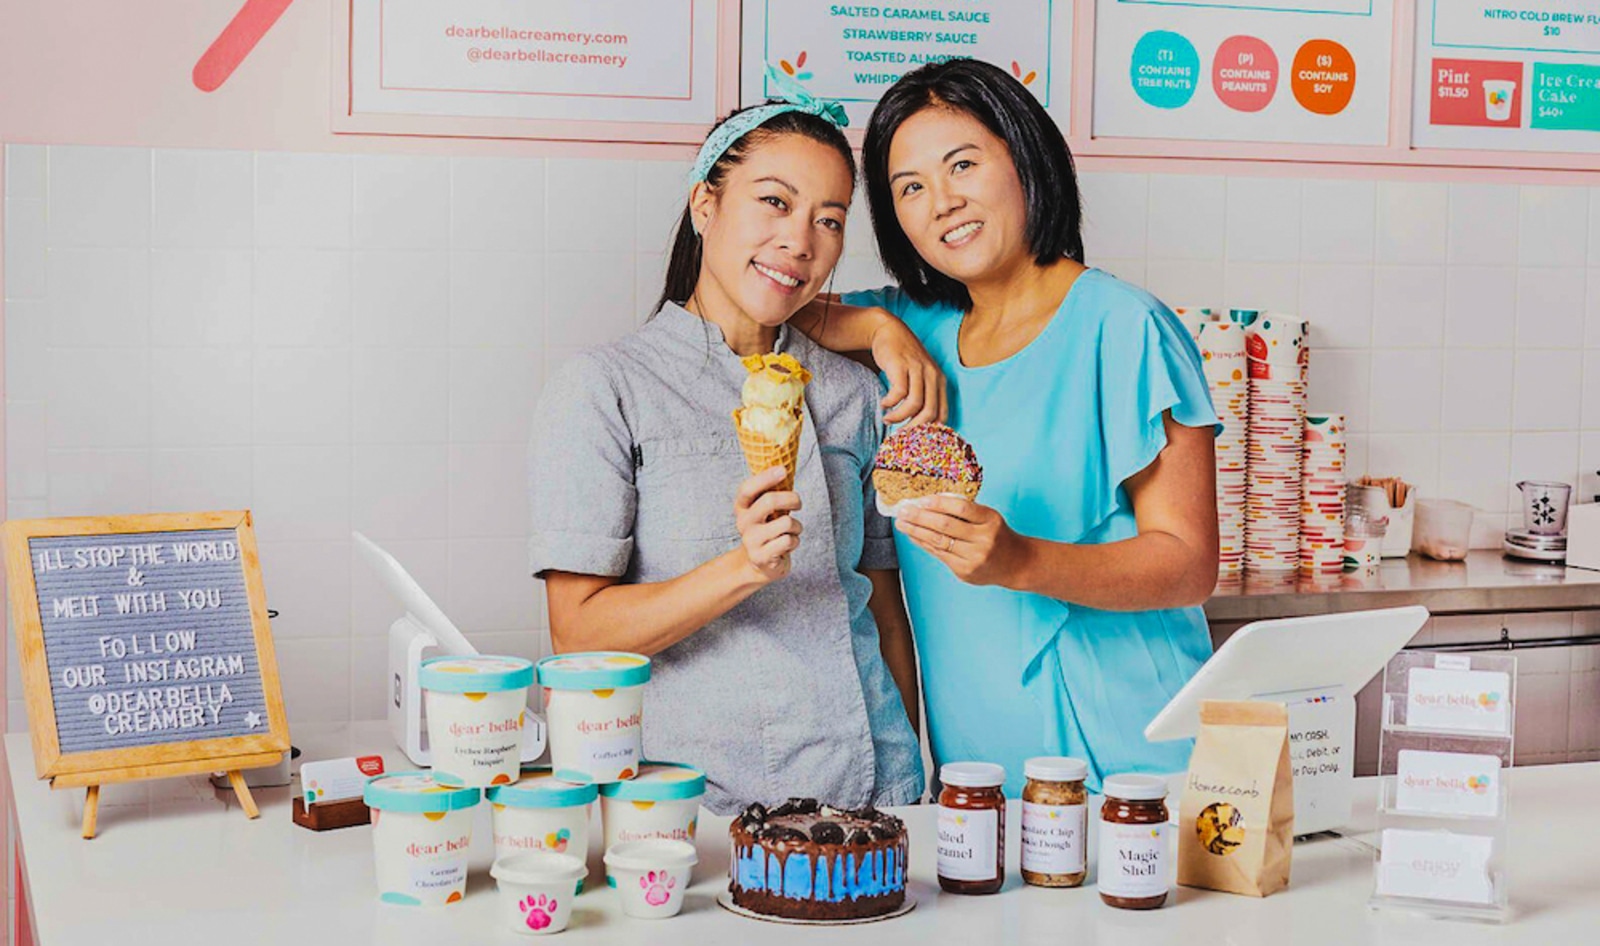 How This Woman-Owned Vegan Ice Cream Shop Became a Hollywood Favorite